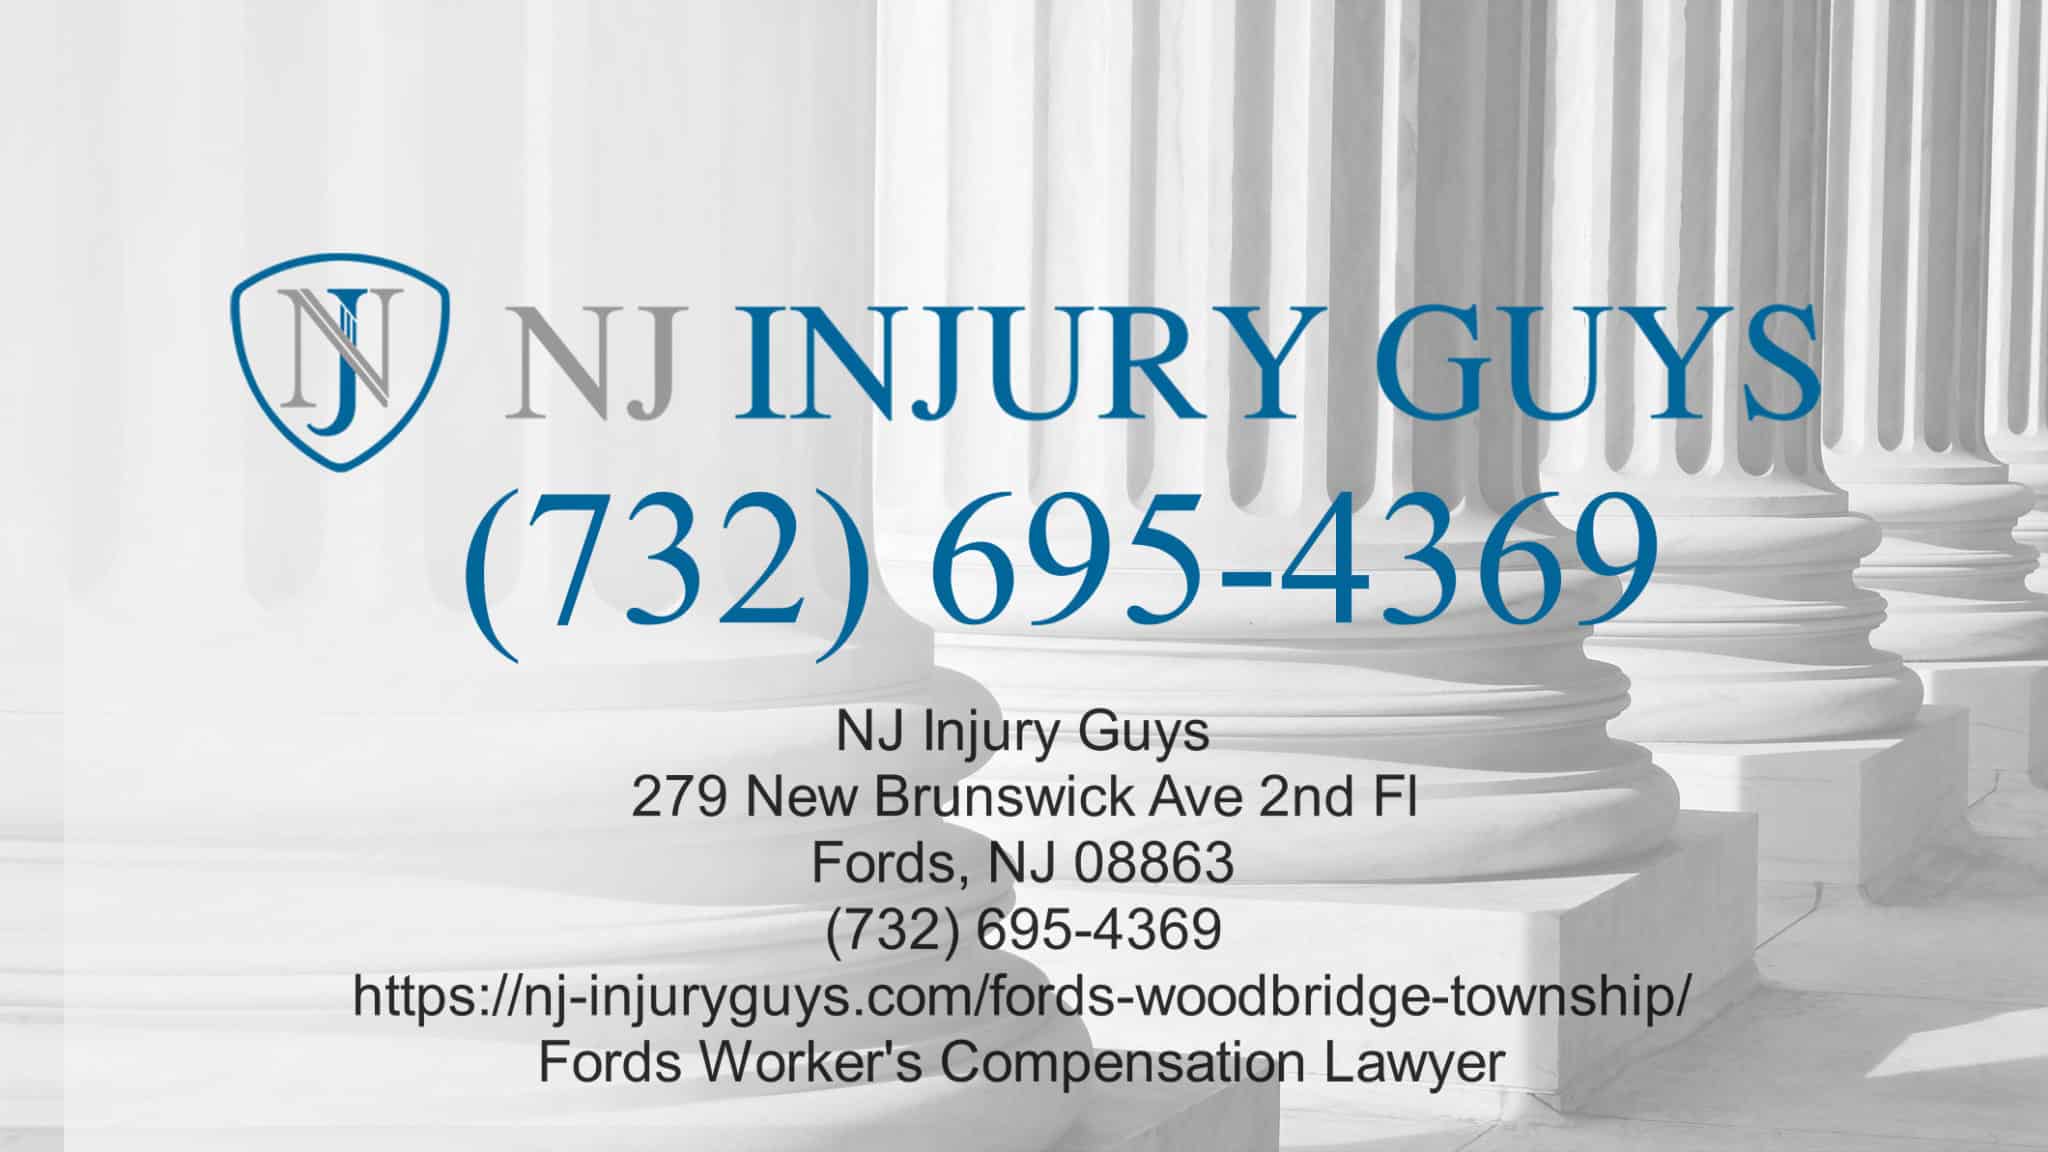 Get The Best Fords, NJ Personal Injury Lawyers For Workplace Back Accidents